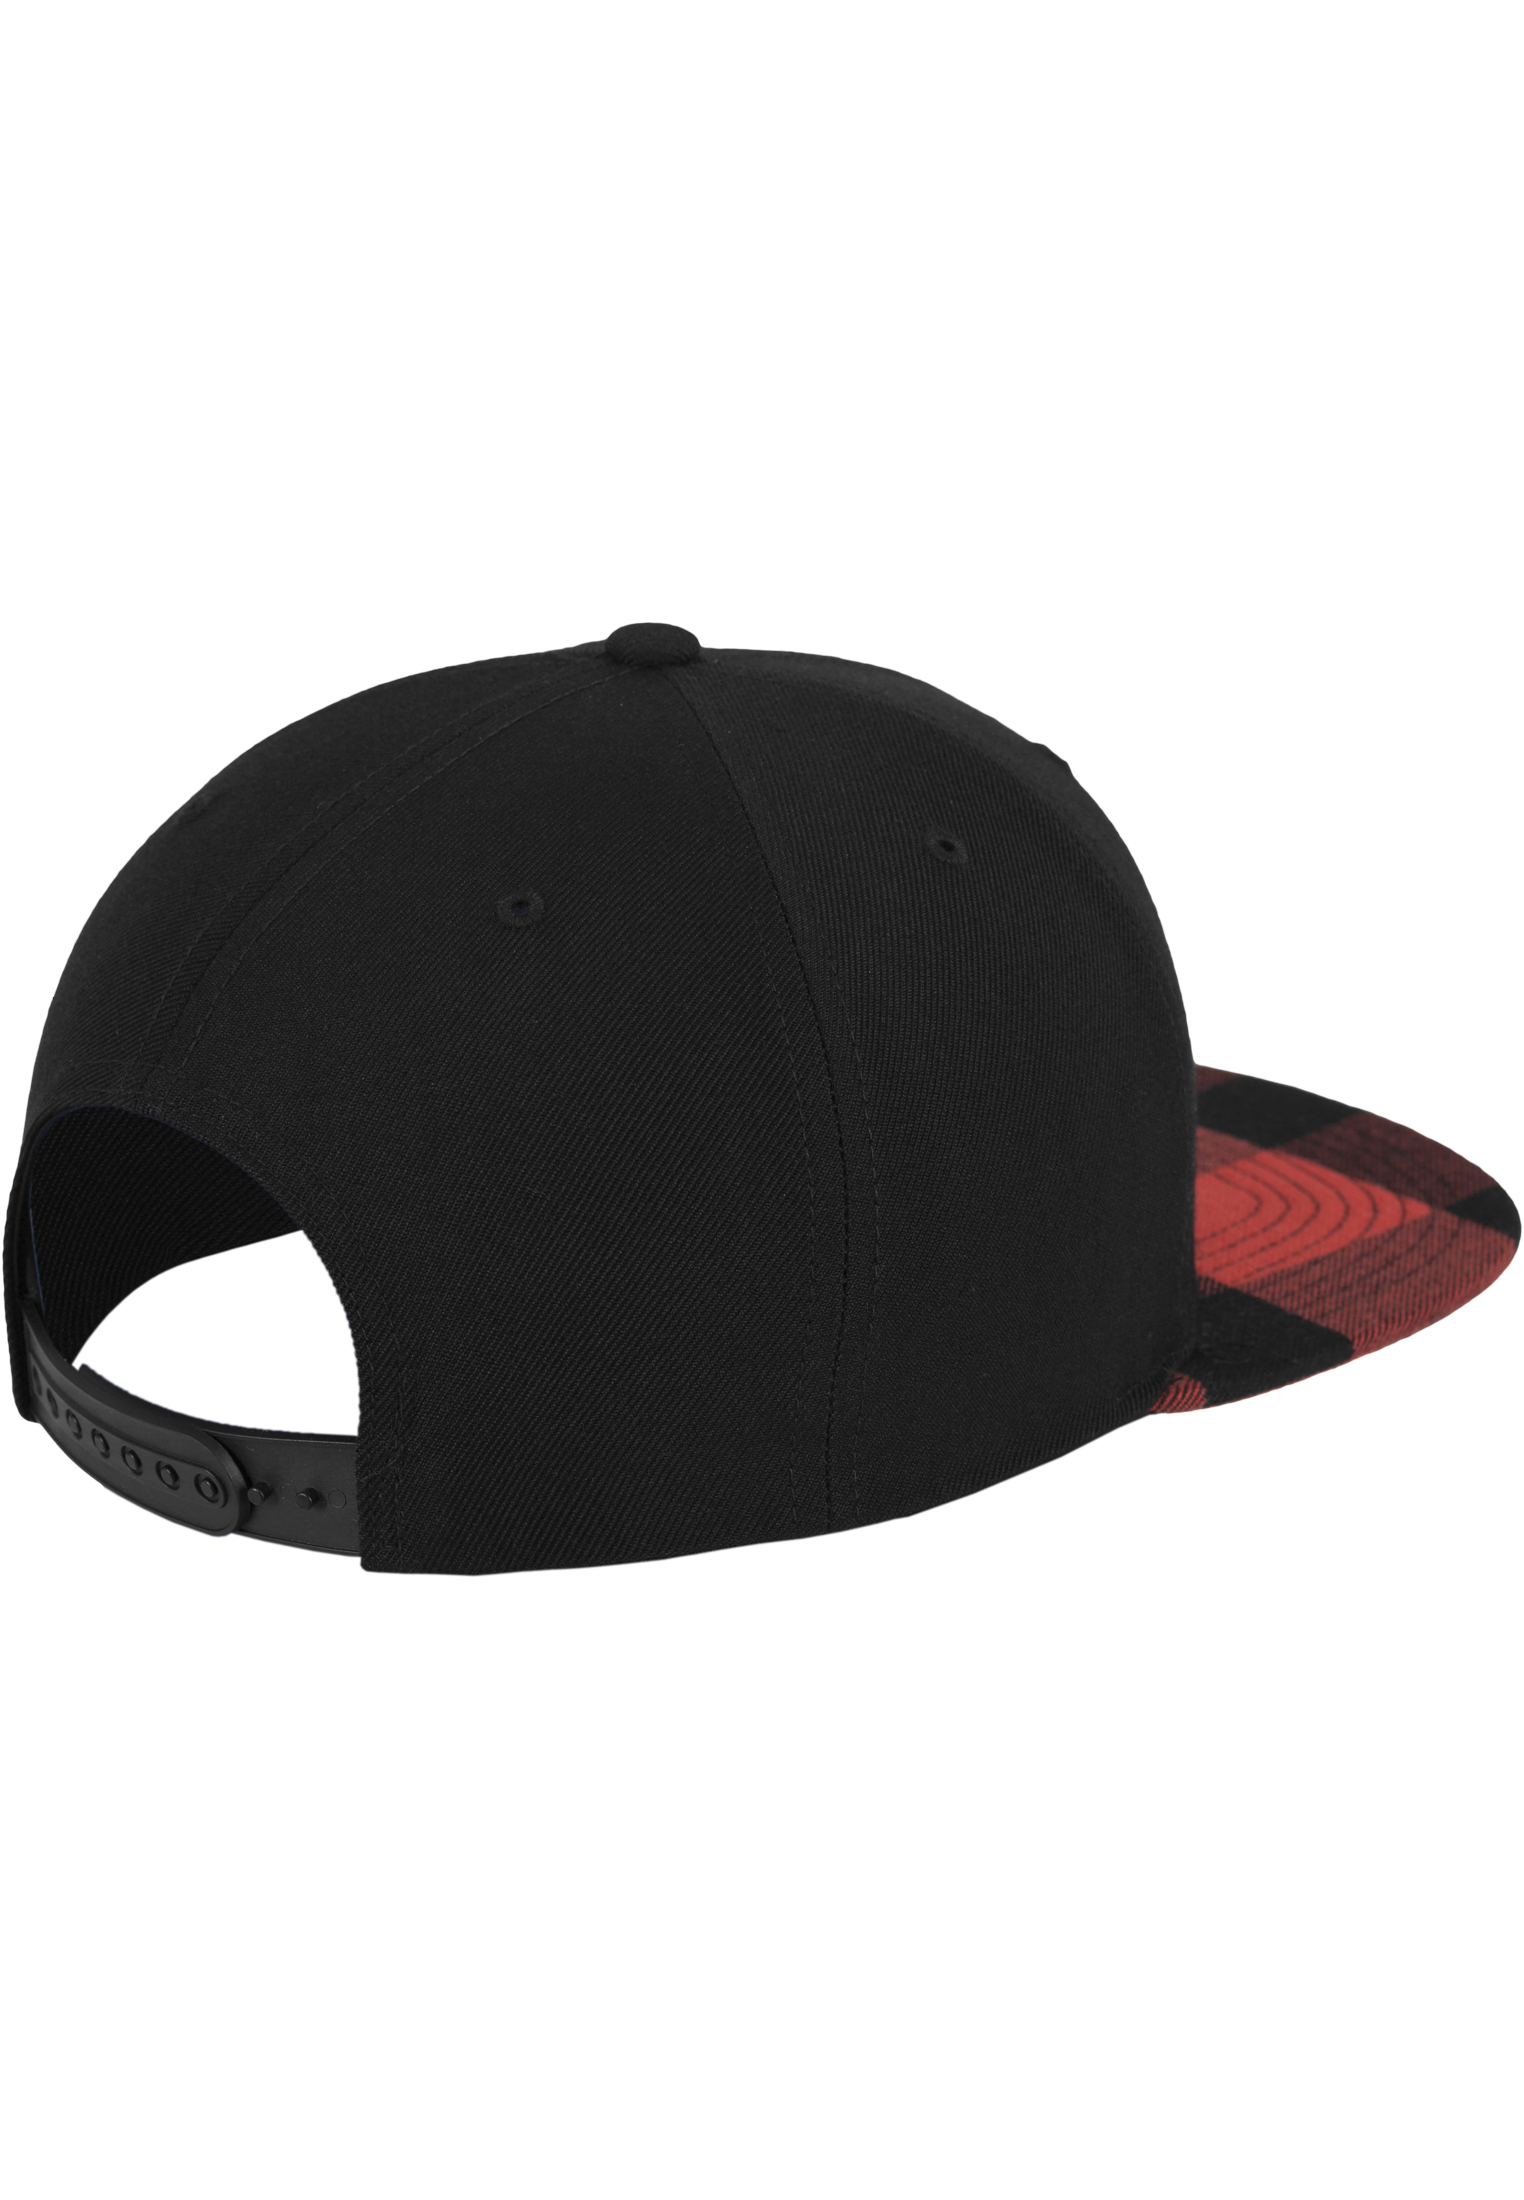 Snapback Checked Flanell Peak Snapback in Farbe blk/red